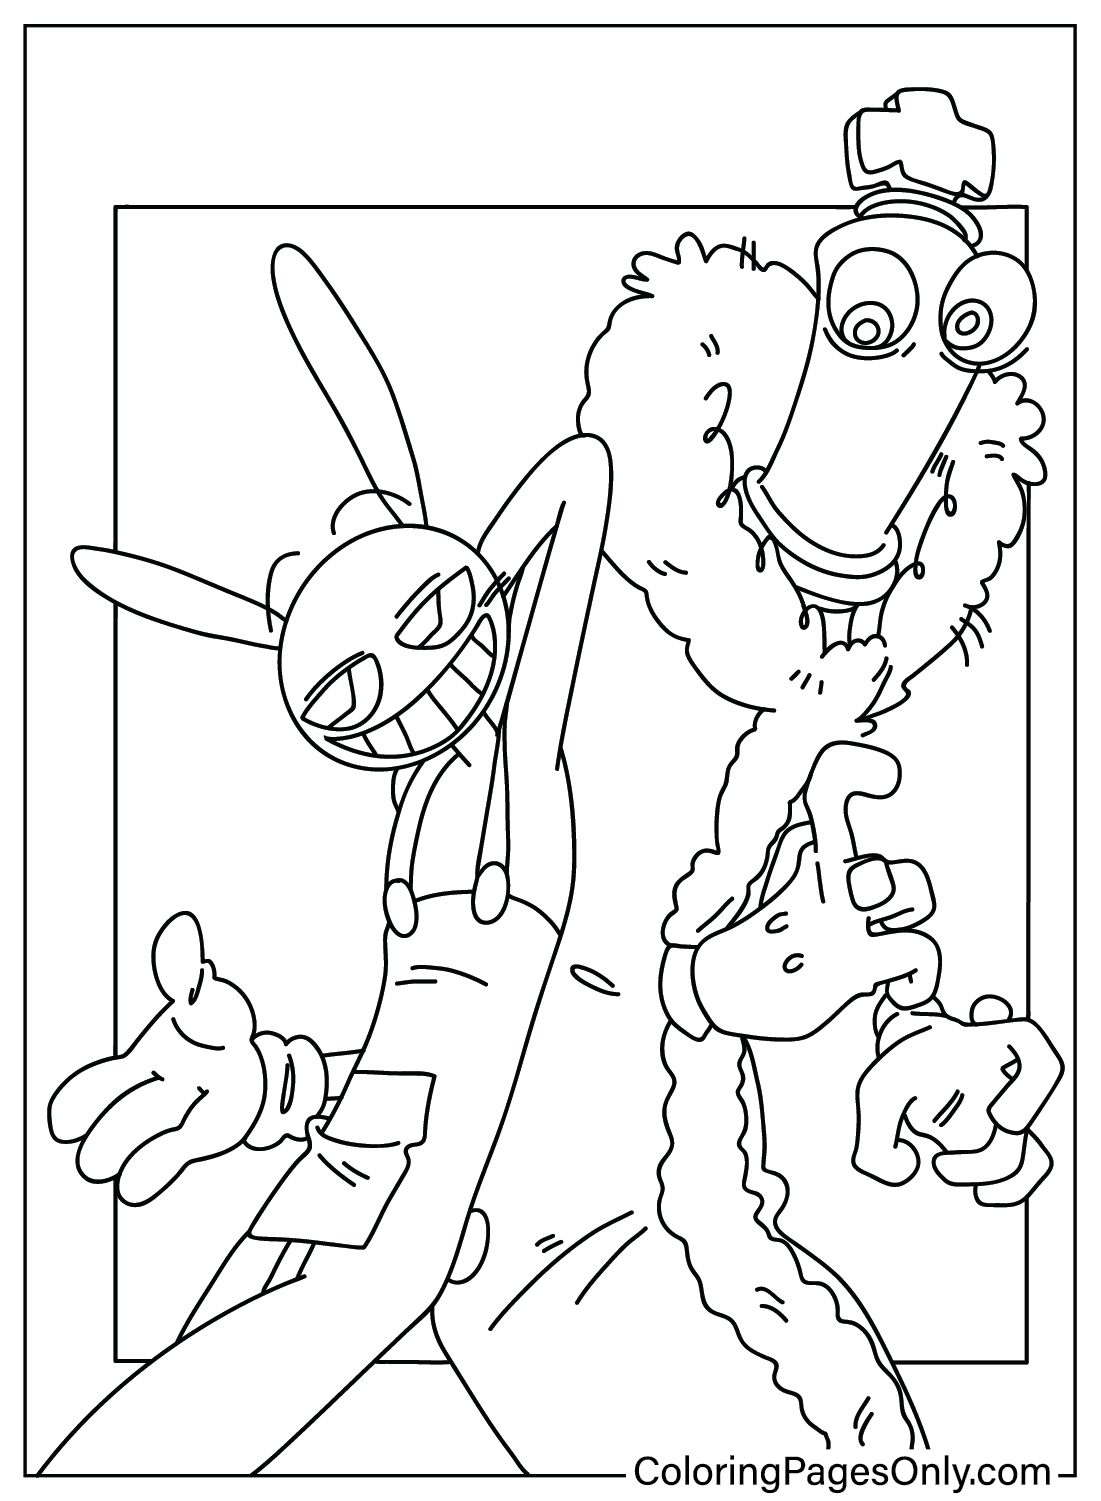 Kinger, Jax Coloring Page from Jax